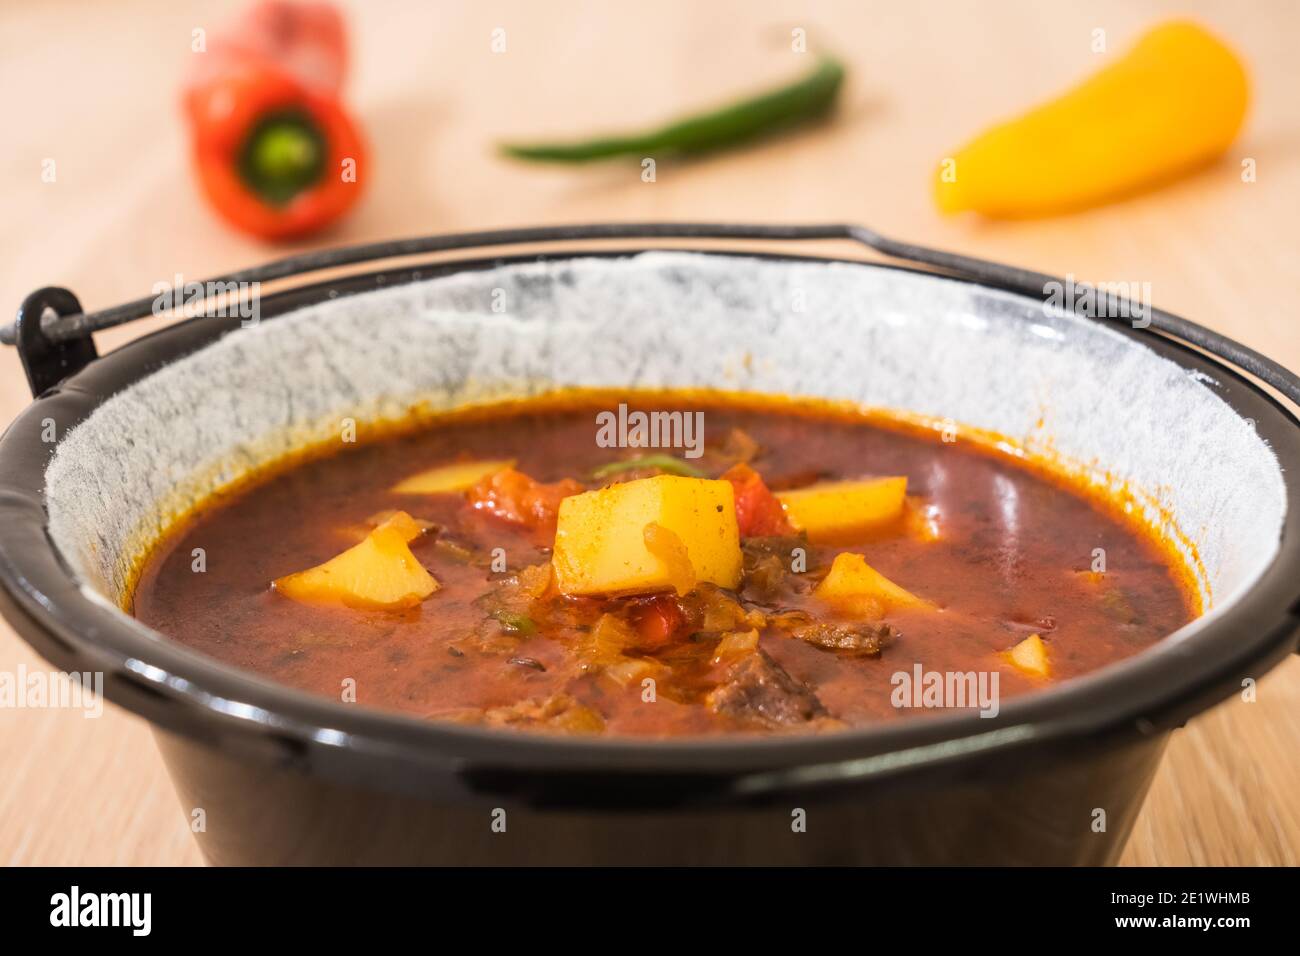 Hungarian Beef Goulash or Gulyas Soup or Stew Served in a Small Cauldron with Potatoes, Meat, Paprika and Bell Pepper and Chili Stock Photo